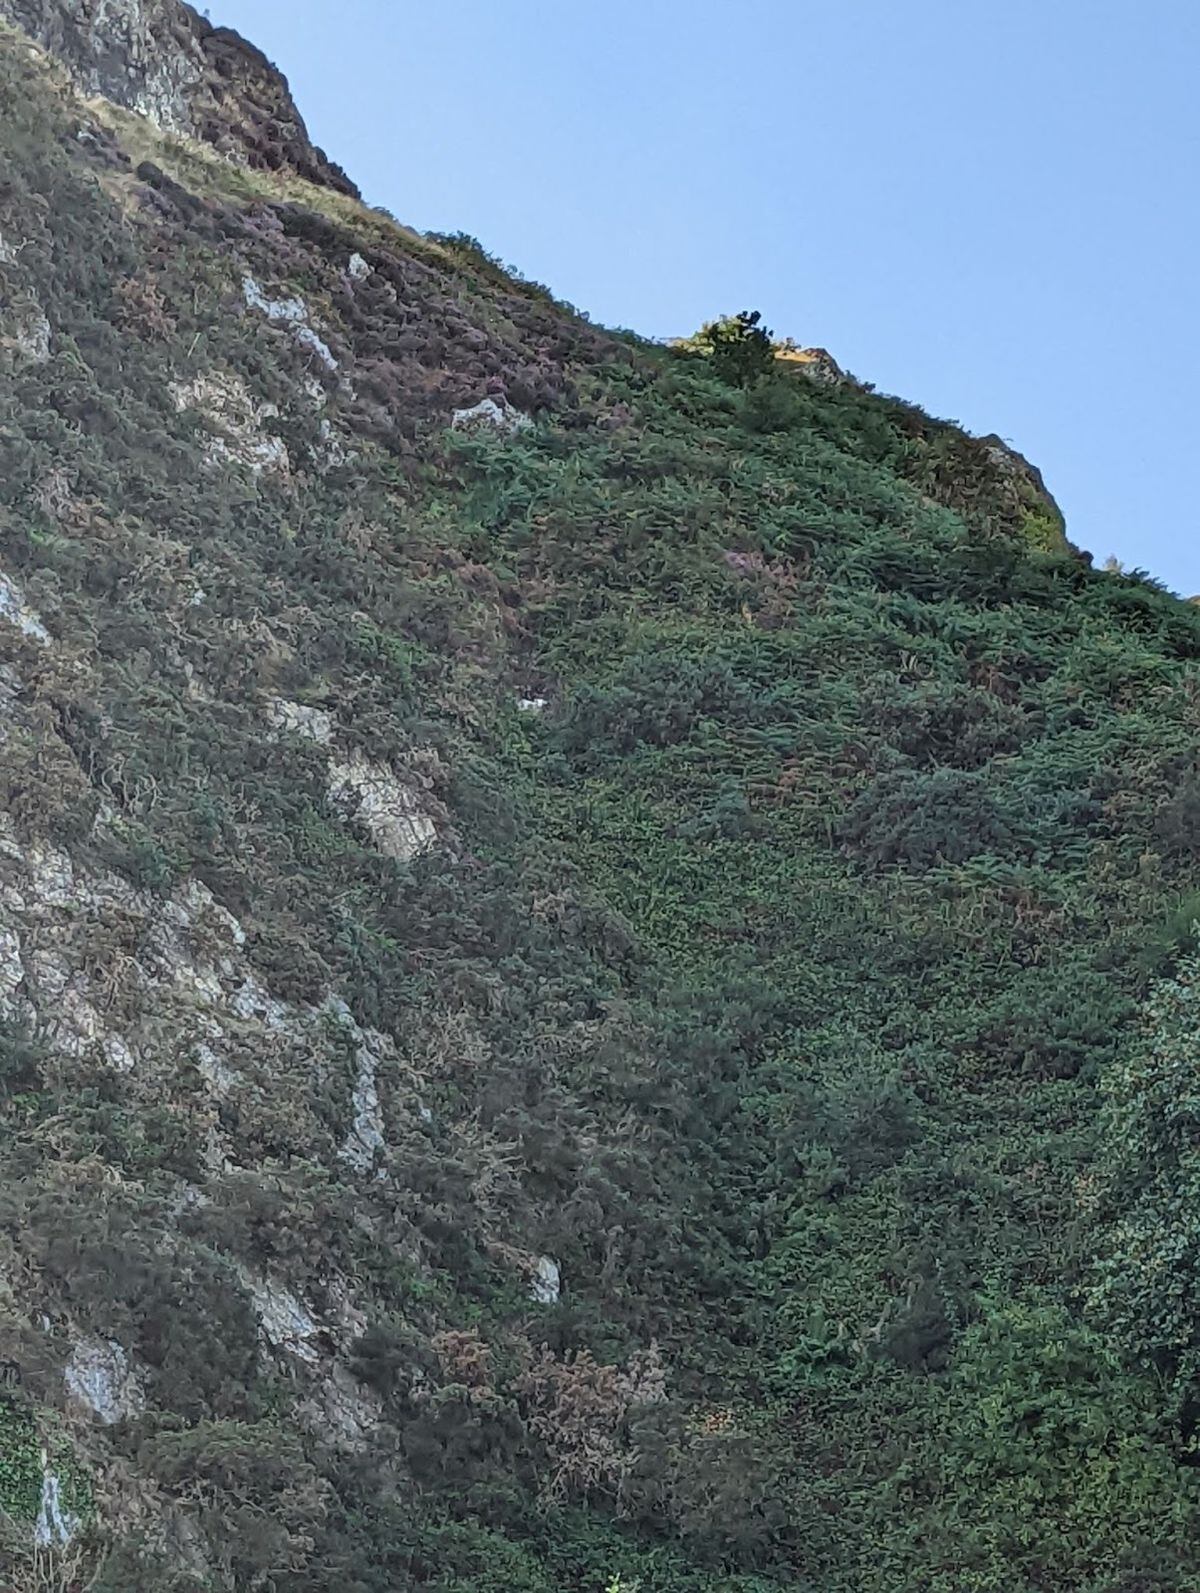 The sheep had fallen off the mountain ledge and was trapped in deep undergrowth